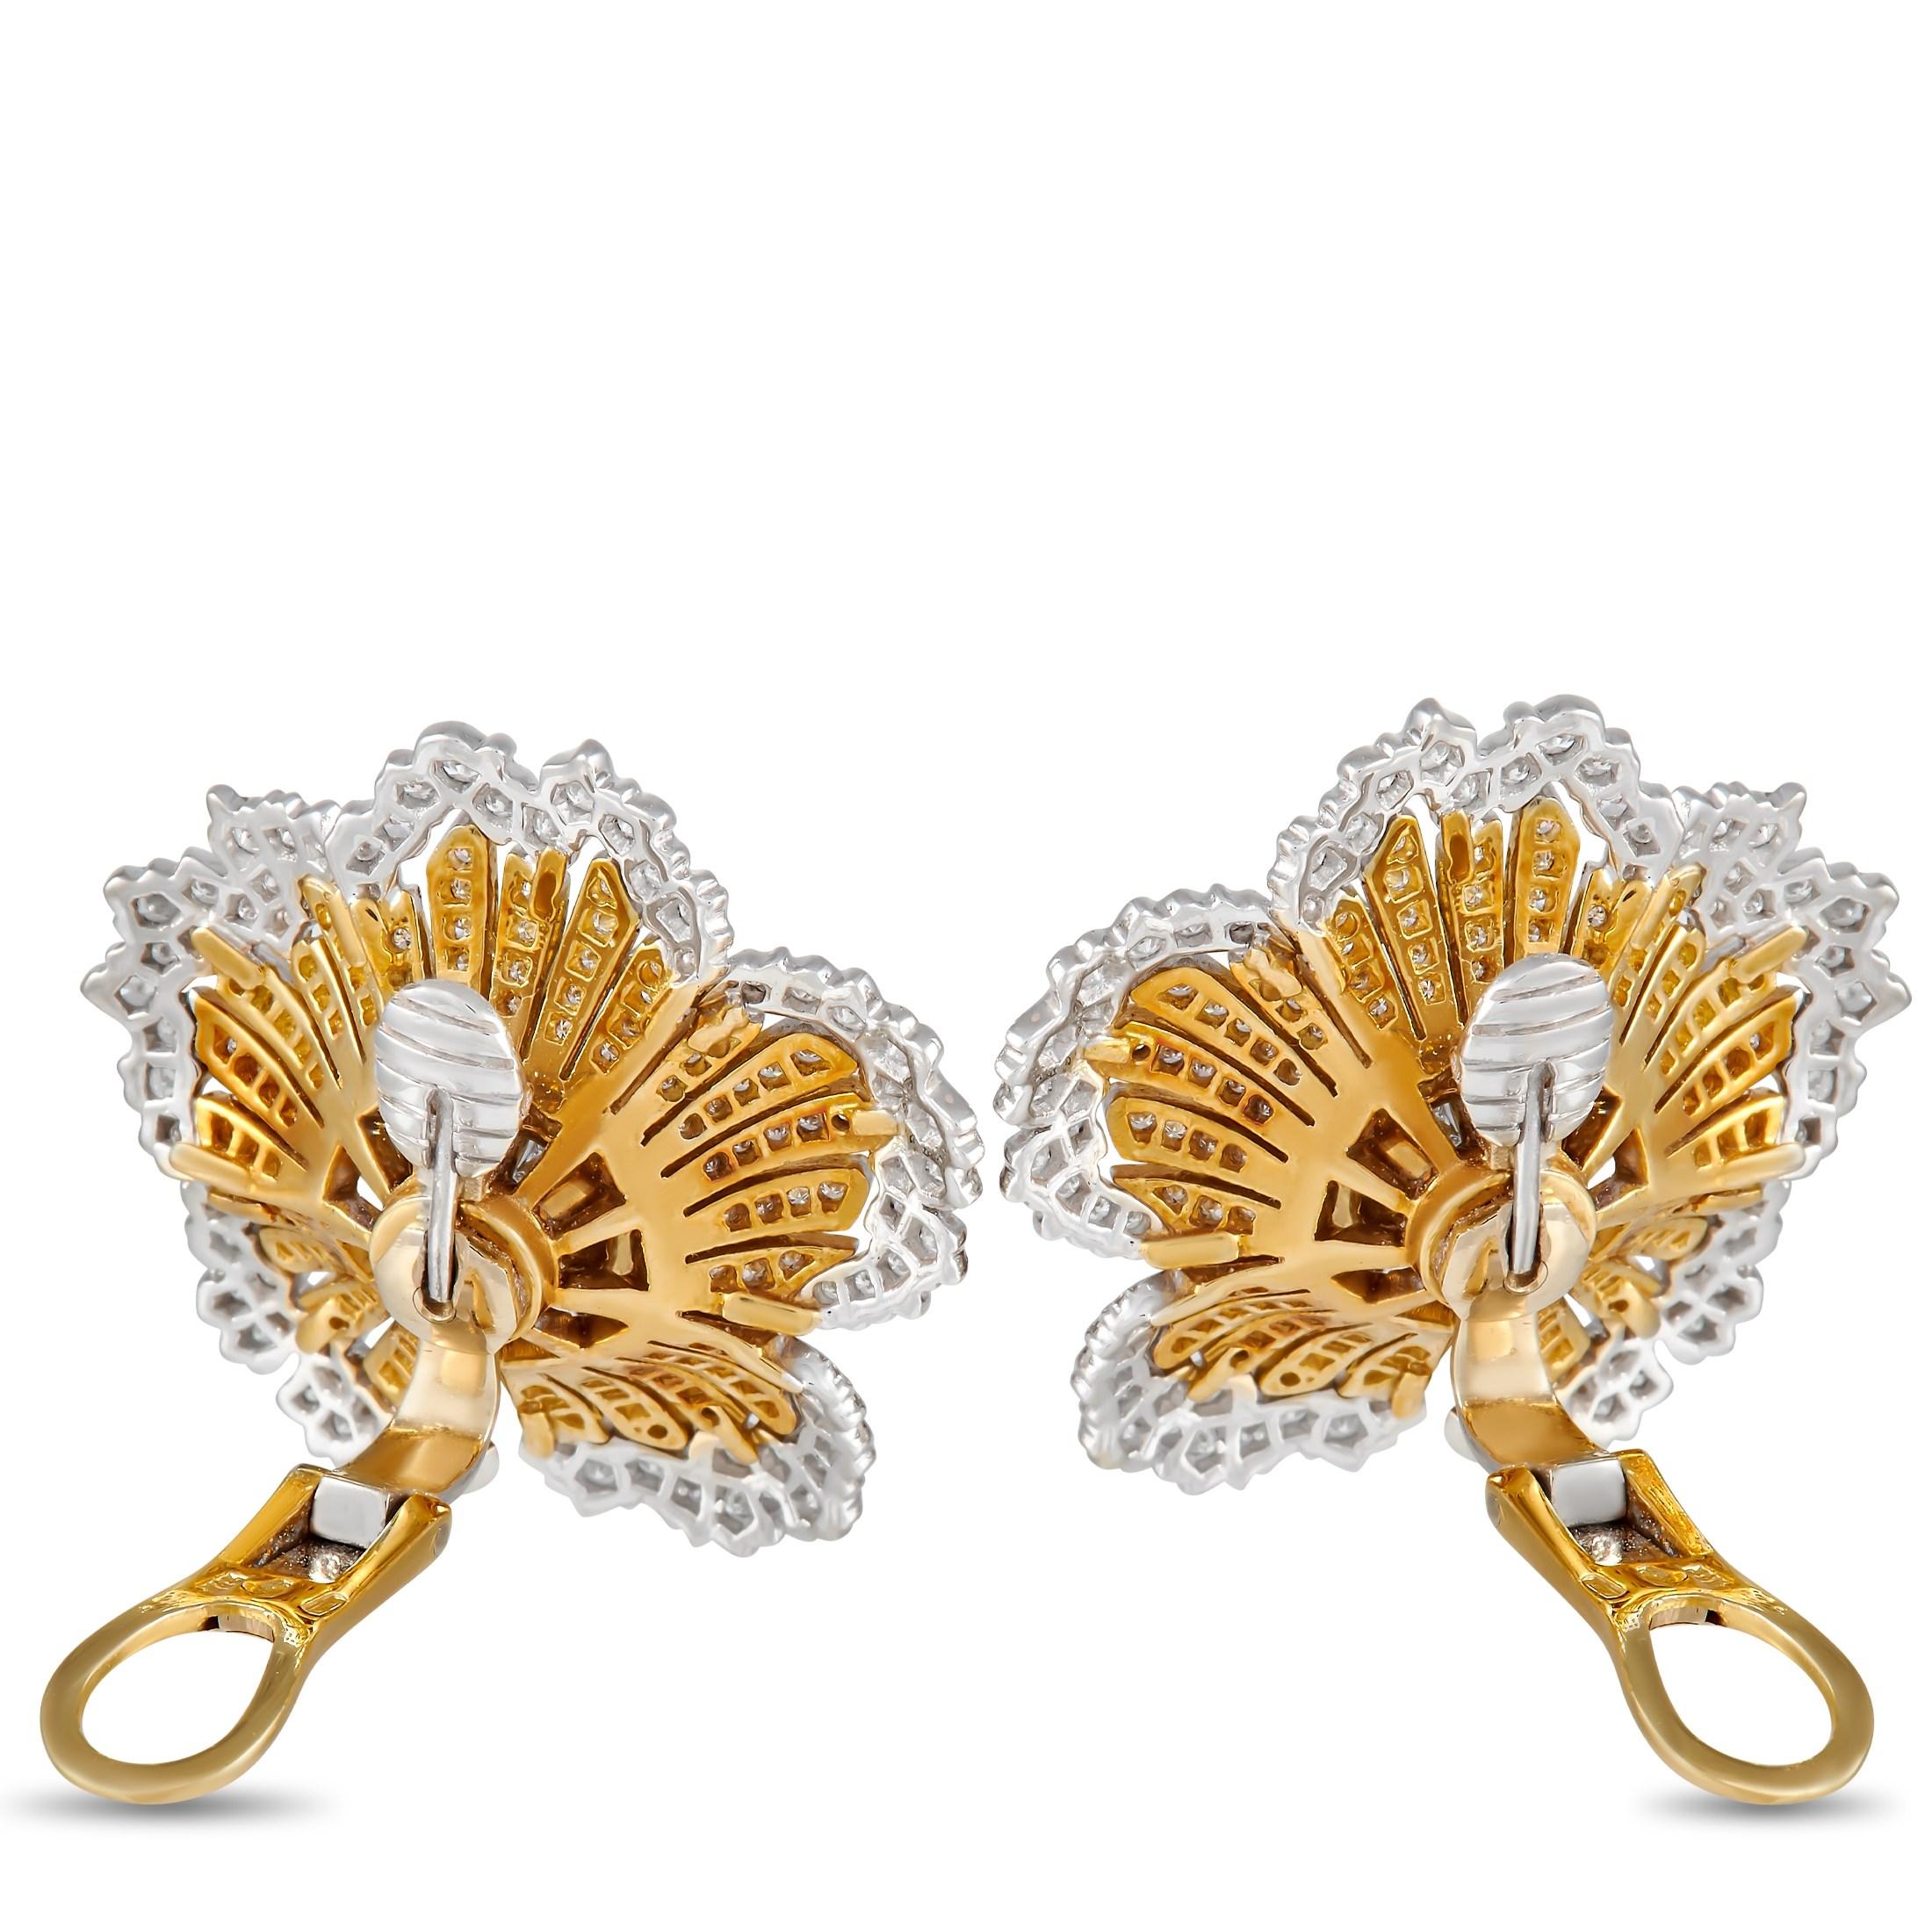 Not your ordinary two-toned floral earrings. These clip-ons carry a vintage flair that is hard to resist. Each earring measures 1.25-inch in diameter and features a double-bloom flower silhouette. The shapely petals have their tips in white gold,